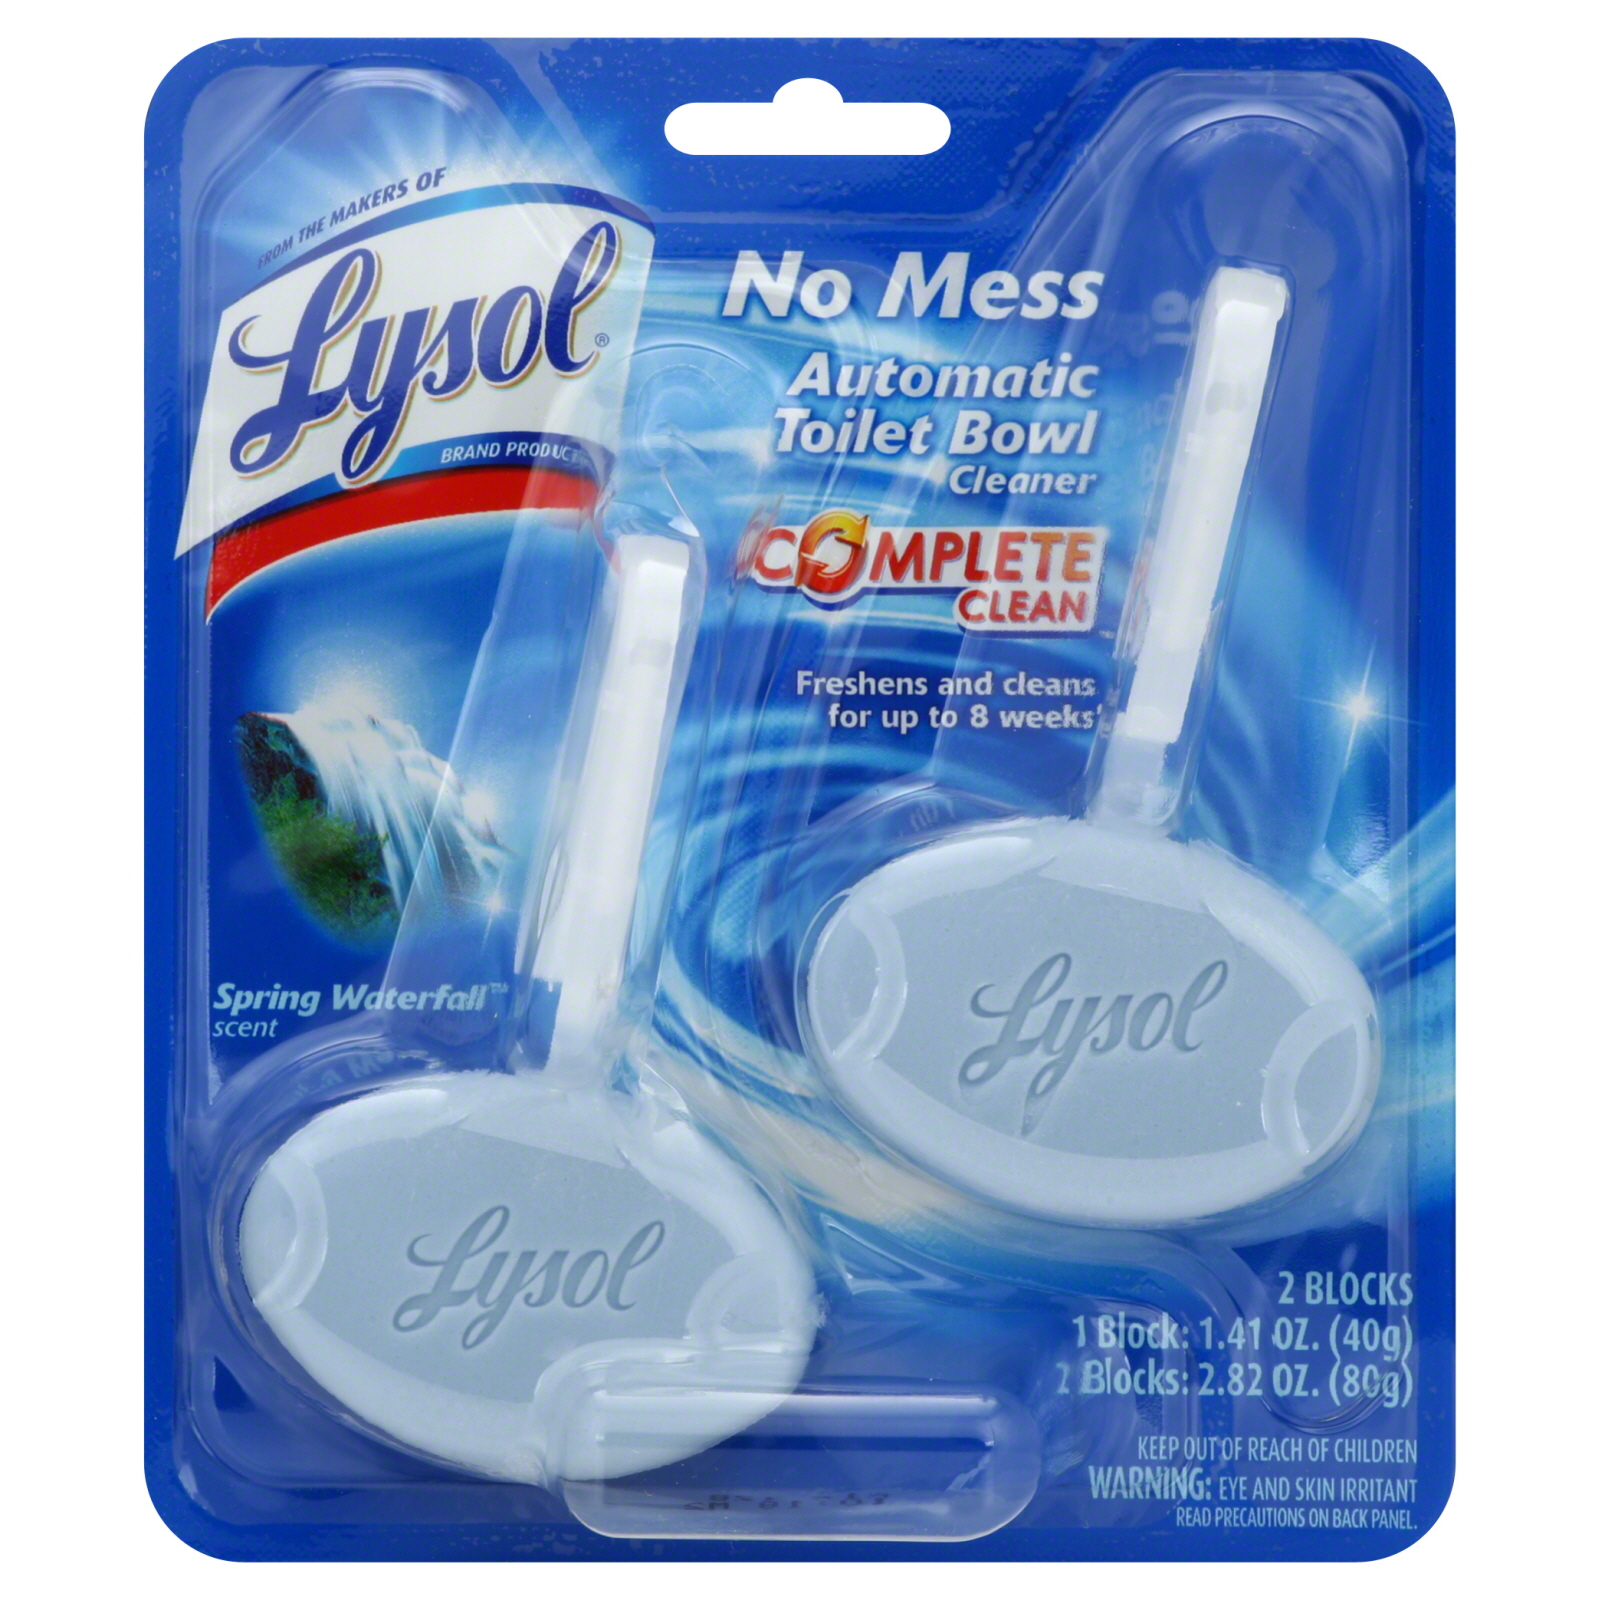 Lysol Complete Clean Toilet Bowl Cleaner, Automatic, Spring Waterfall Scent 2 blocks [2.82 oz (80 g)]